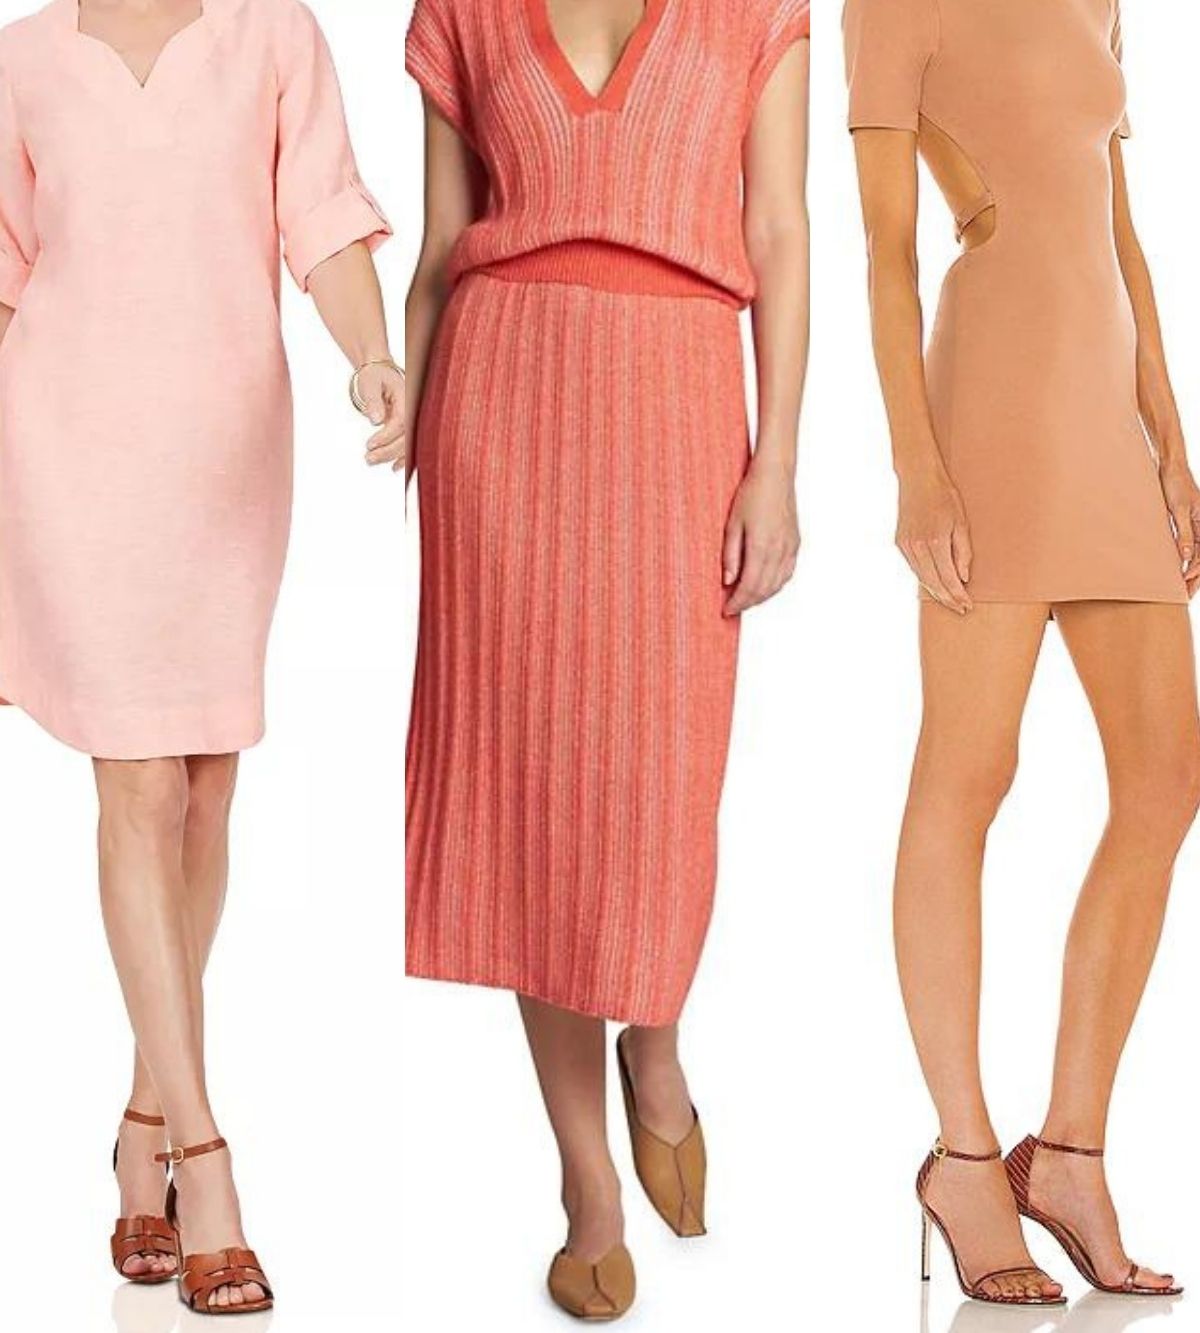 3 women wearing different tan and brown color shoes with peach dress outfits.